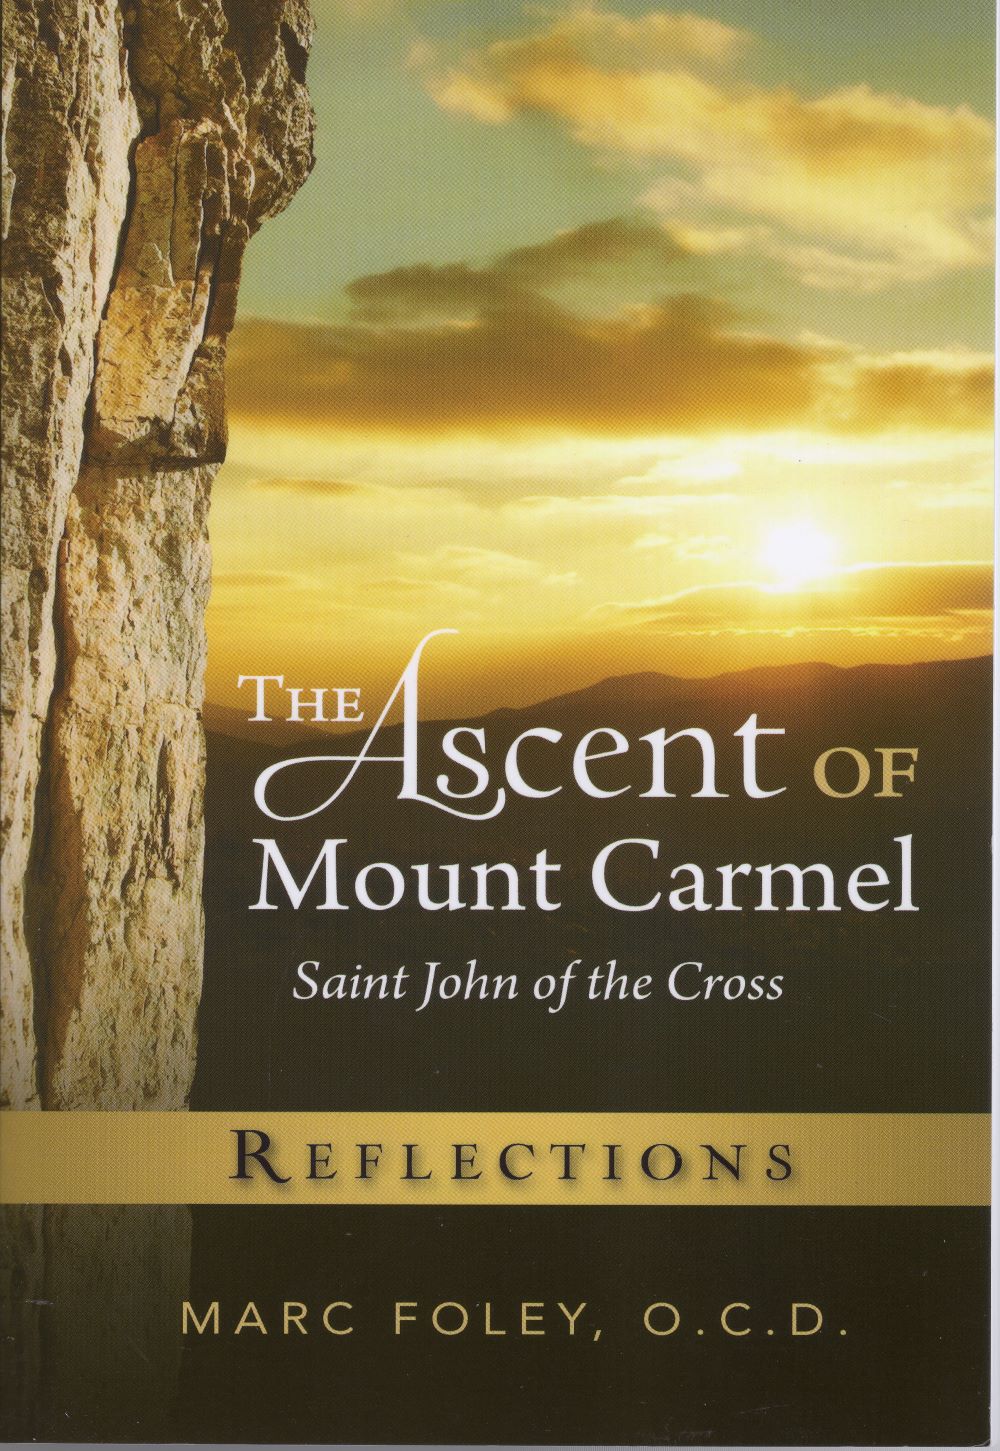 The Ascent of Mount Carmel: Reflections (2013)